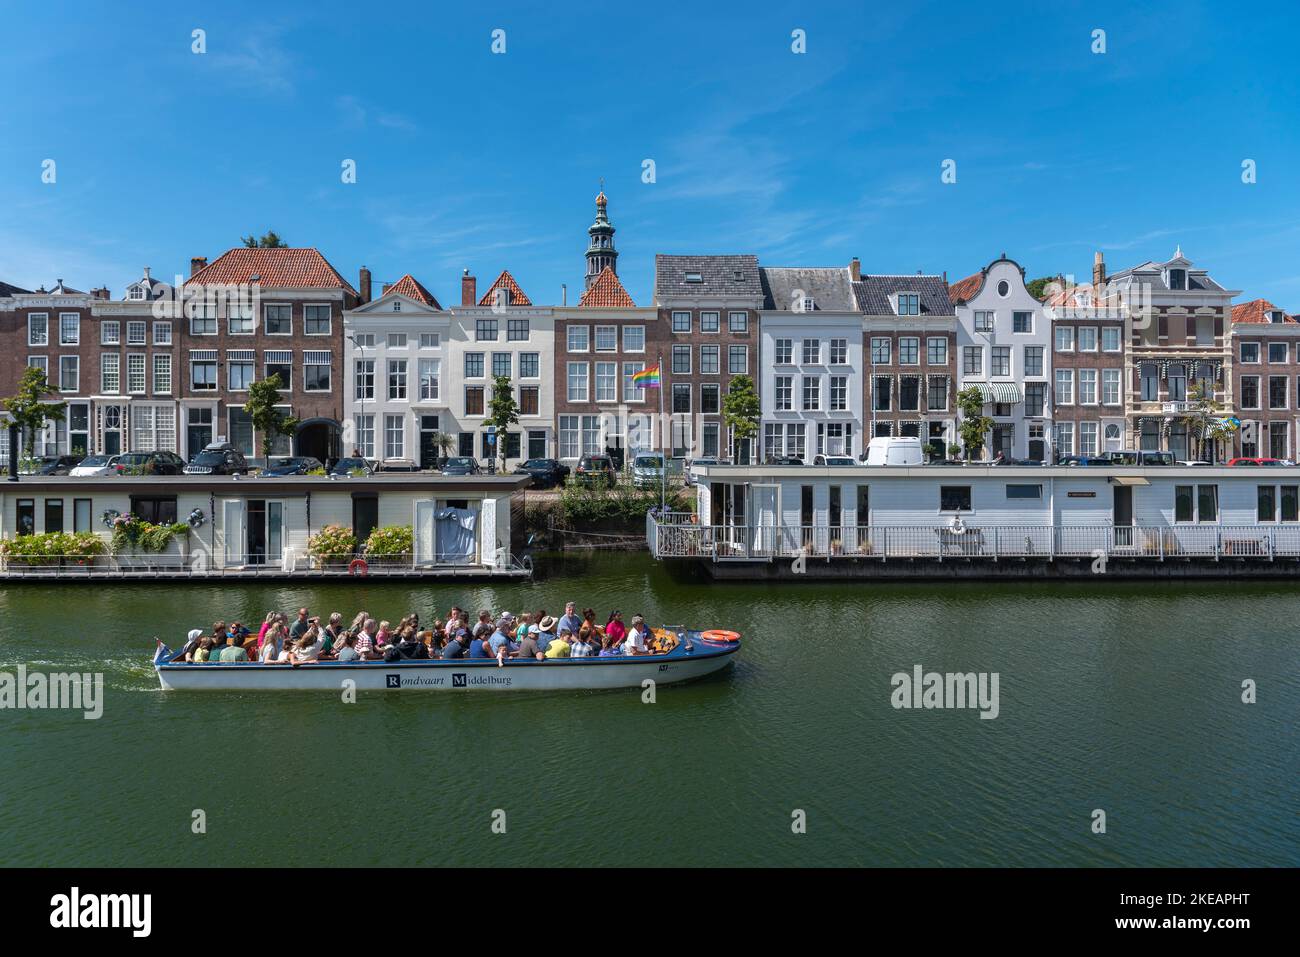 Tour boat in front of historic house facades and houseboats on the Londensekaai, Middelburg, Zeeland, Netherlands, Europe Stock Photo